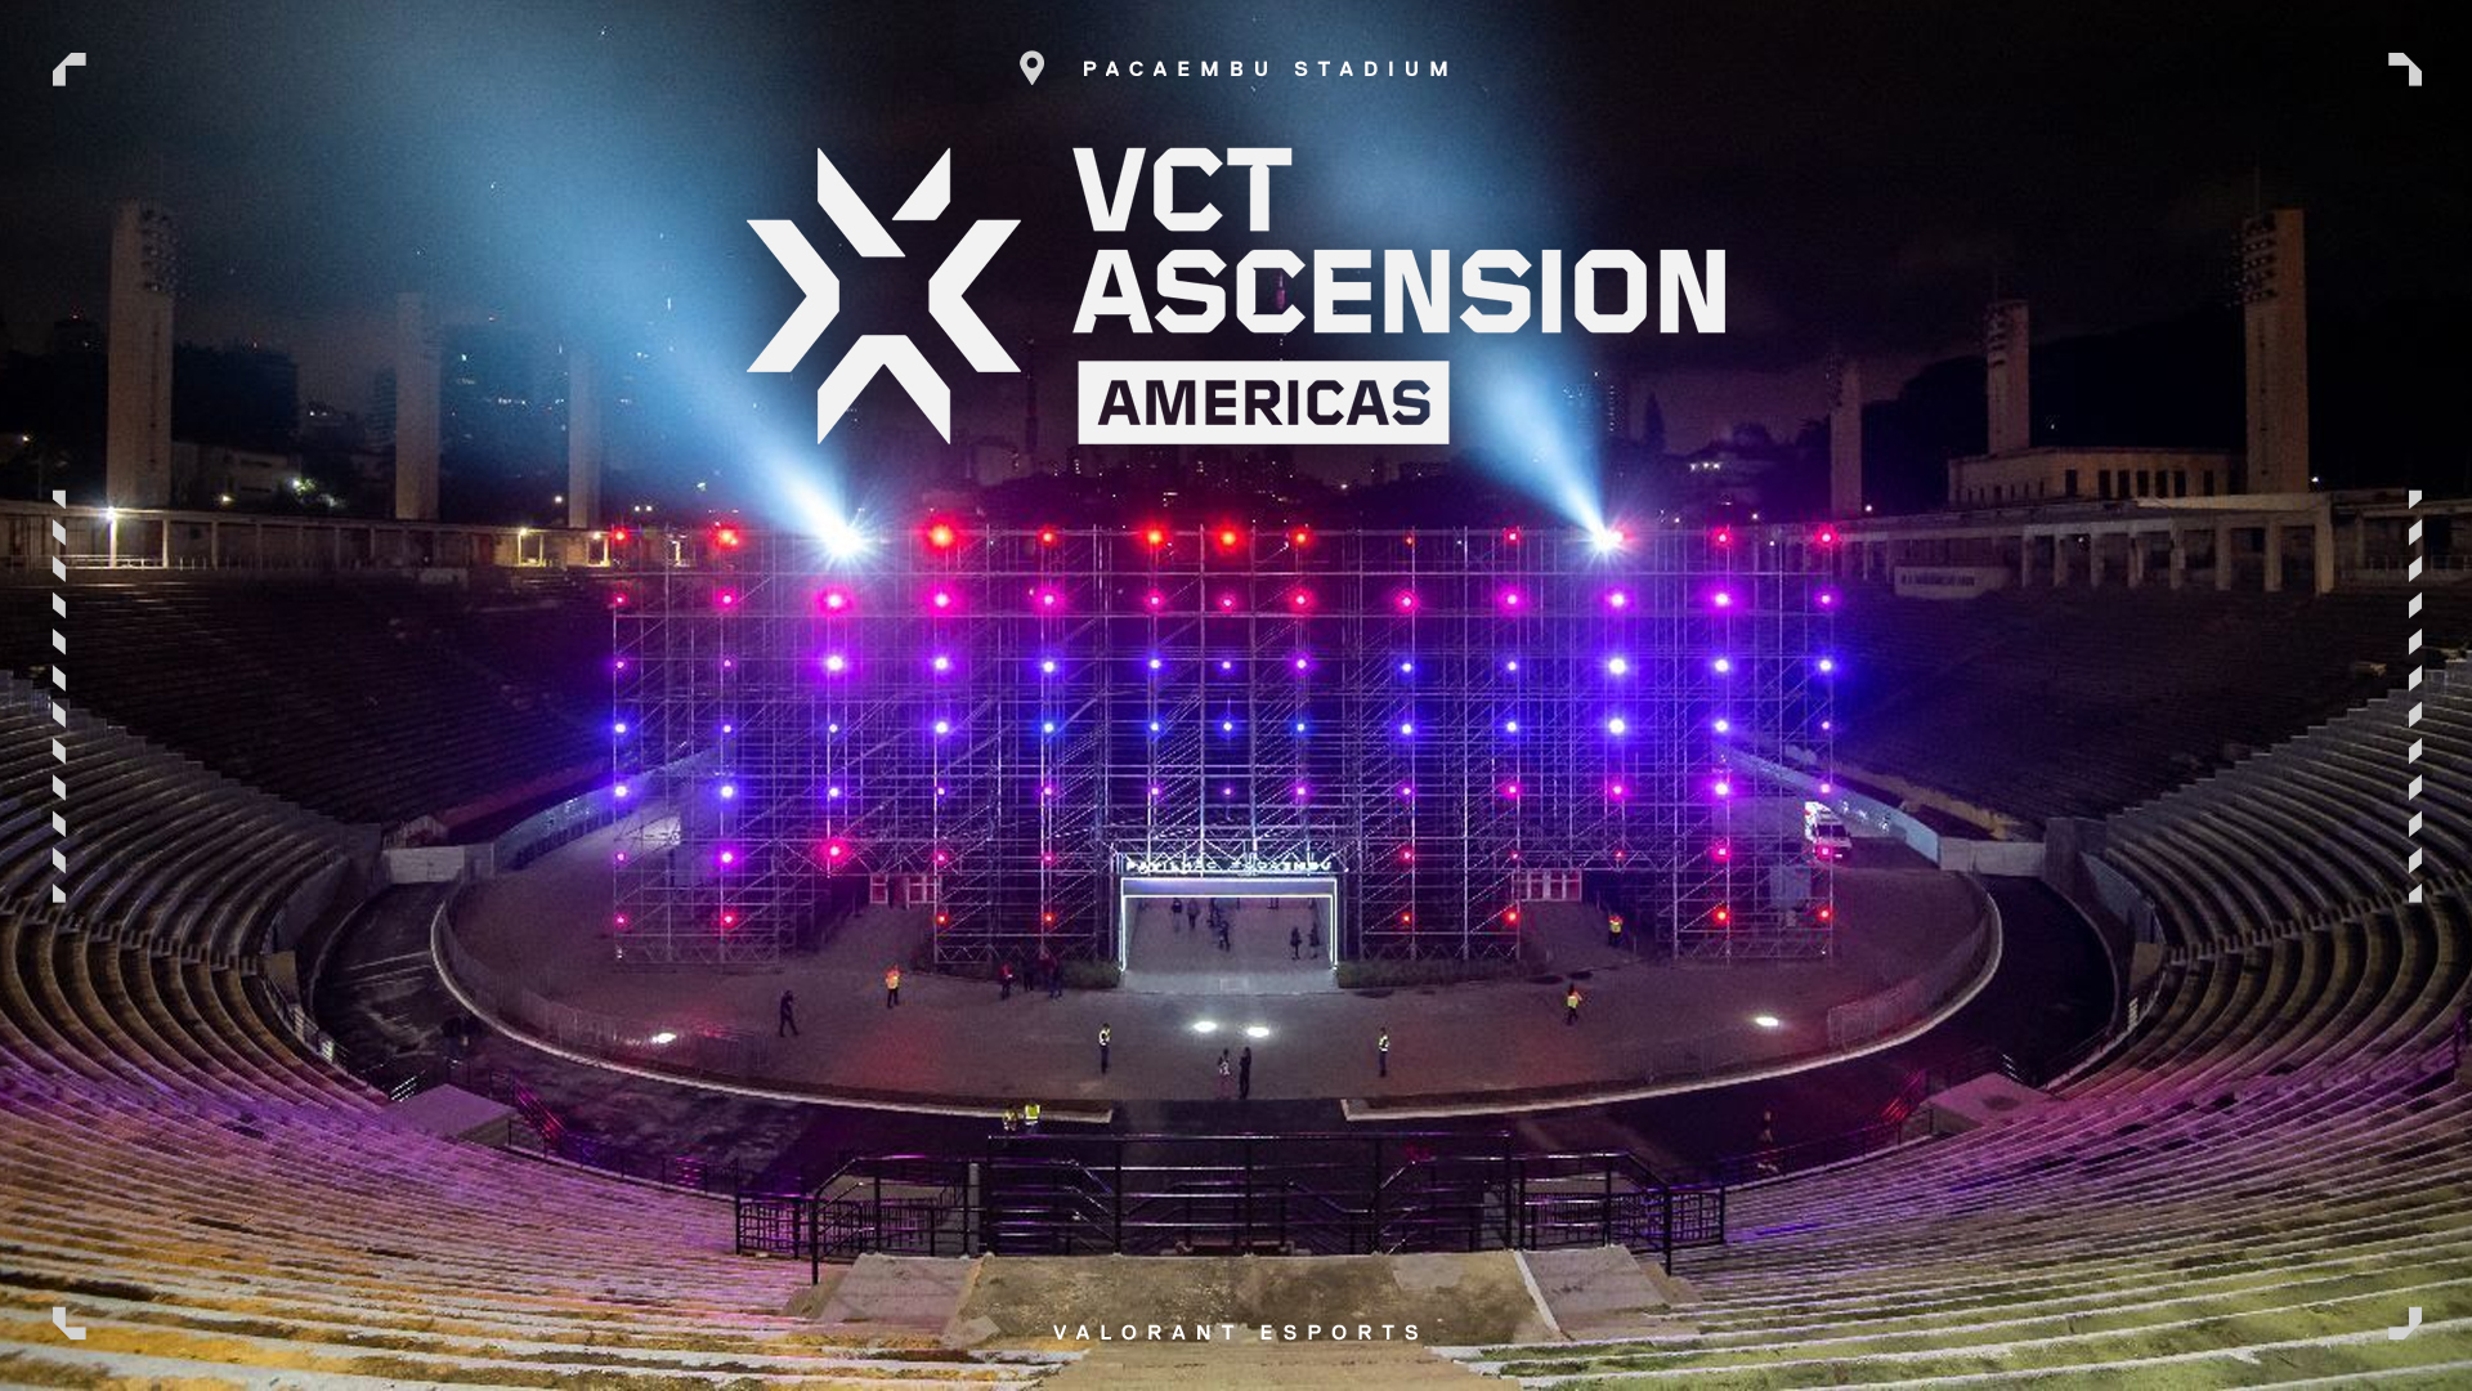 Photo: vct americas ascension